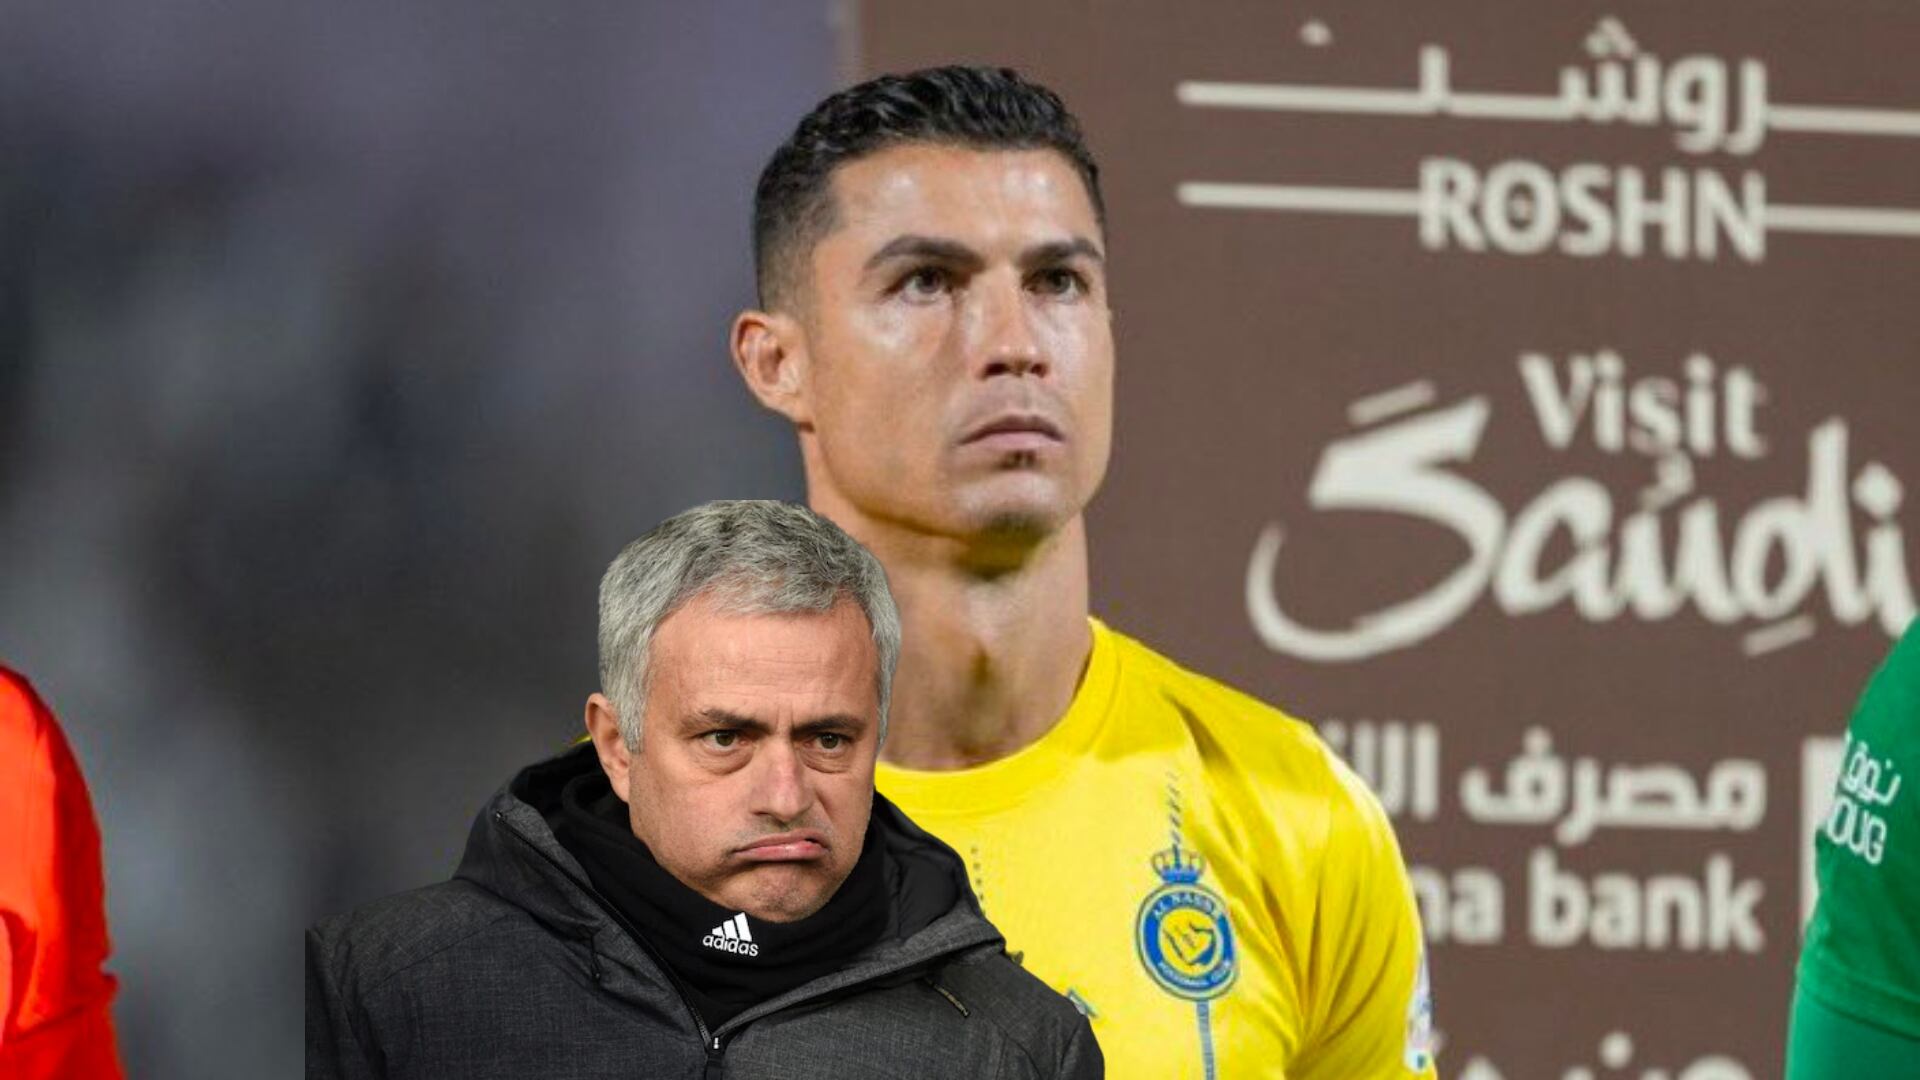 The reason why Cristiano and Mourinho's meeting couldn't be done before, both of them would have wanted it